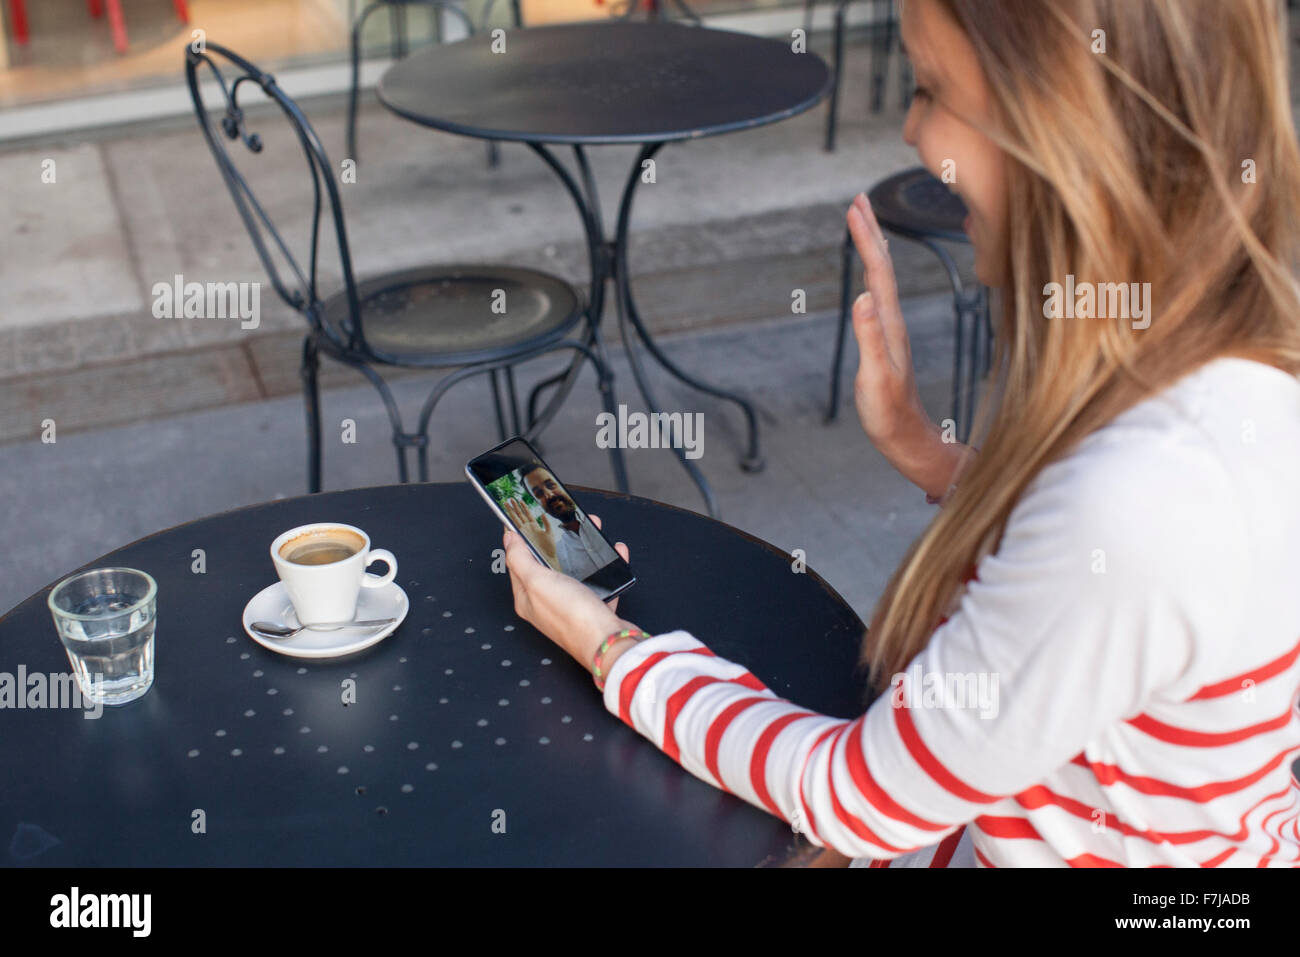 Young woman using smartphone to video chat in cafe Stock Photo